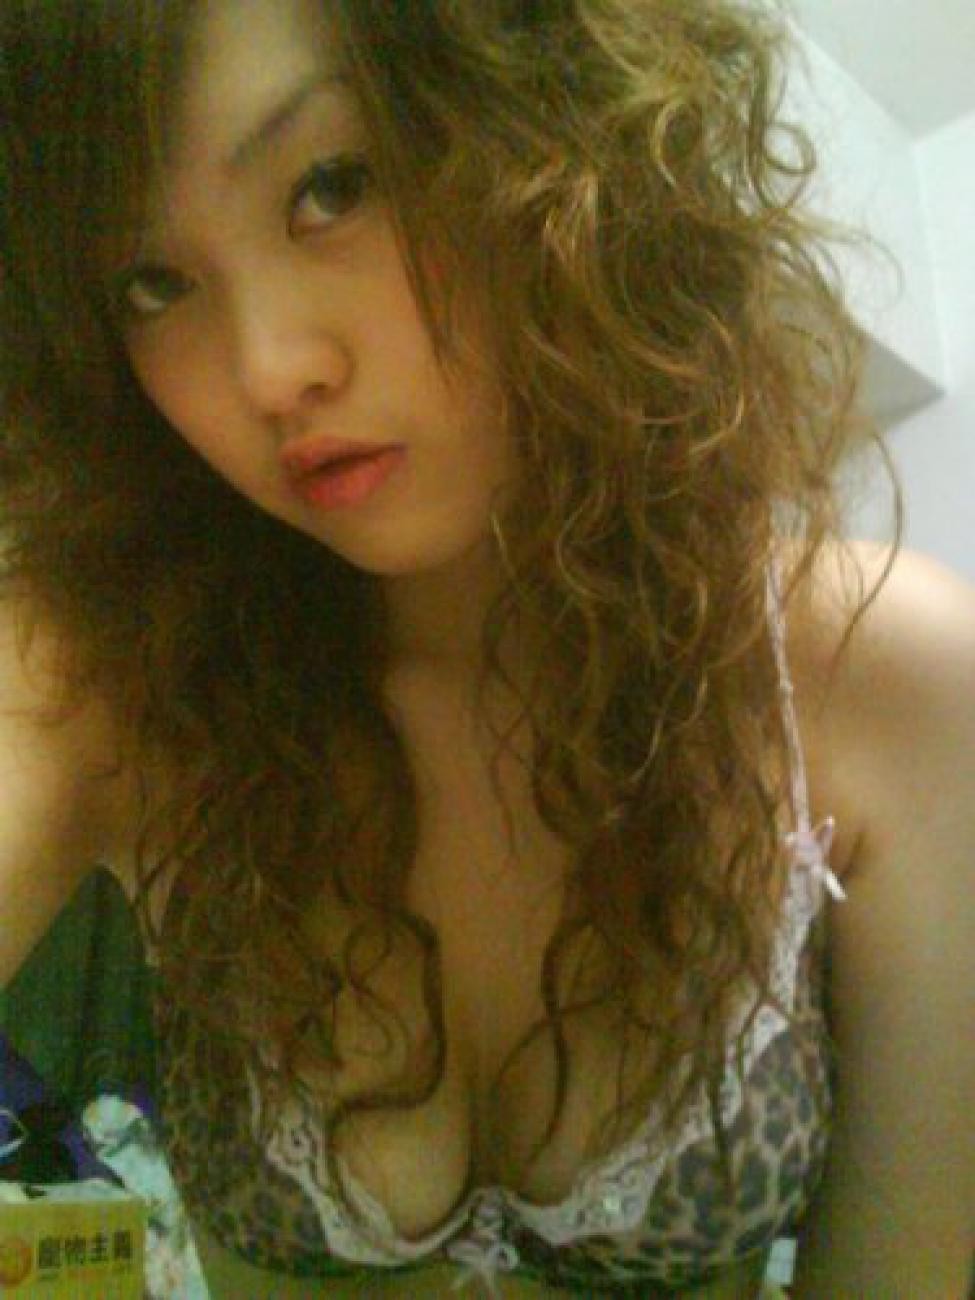 Naughty and hot selfpics taken by an amateur Asian chick #69921485